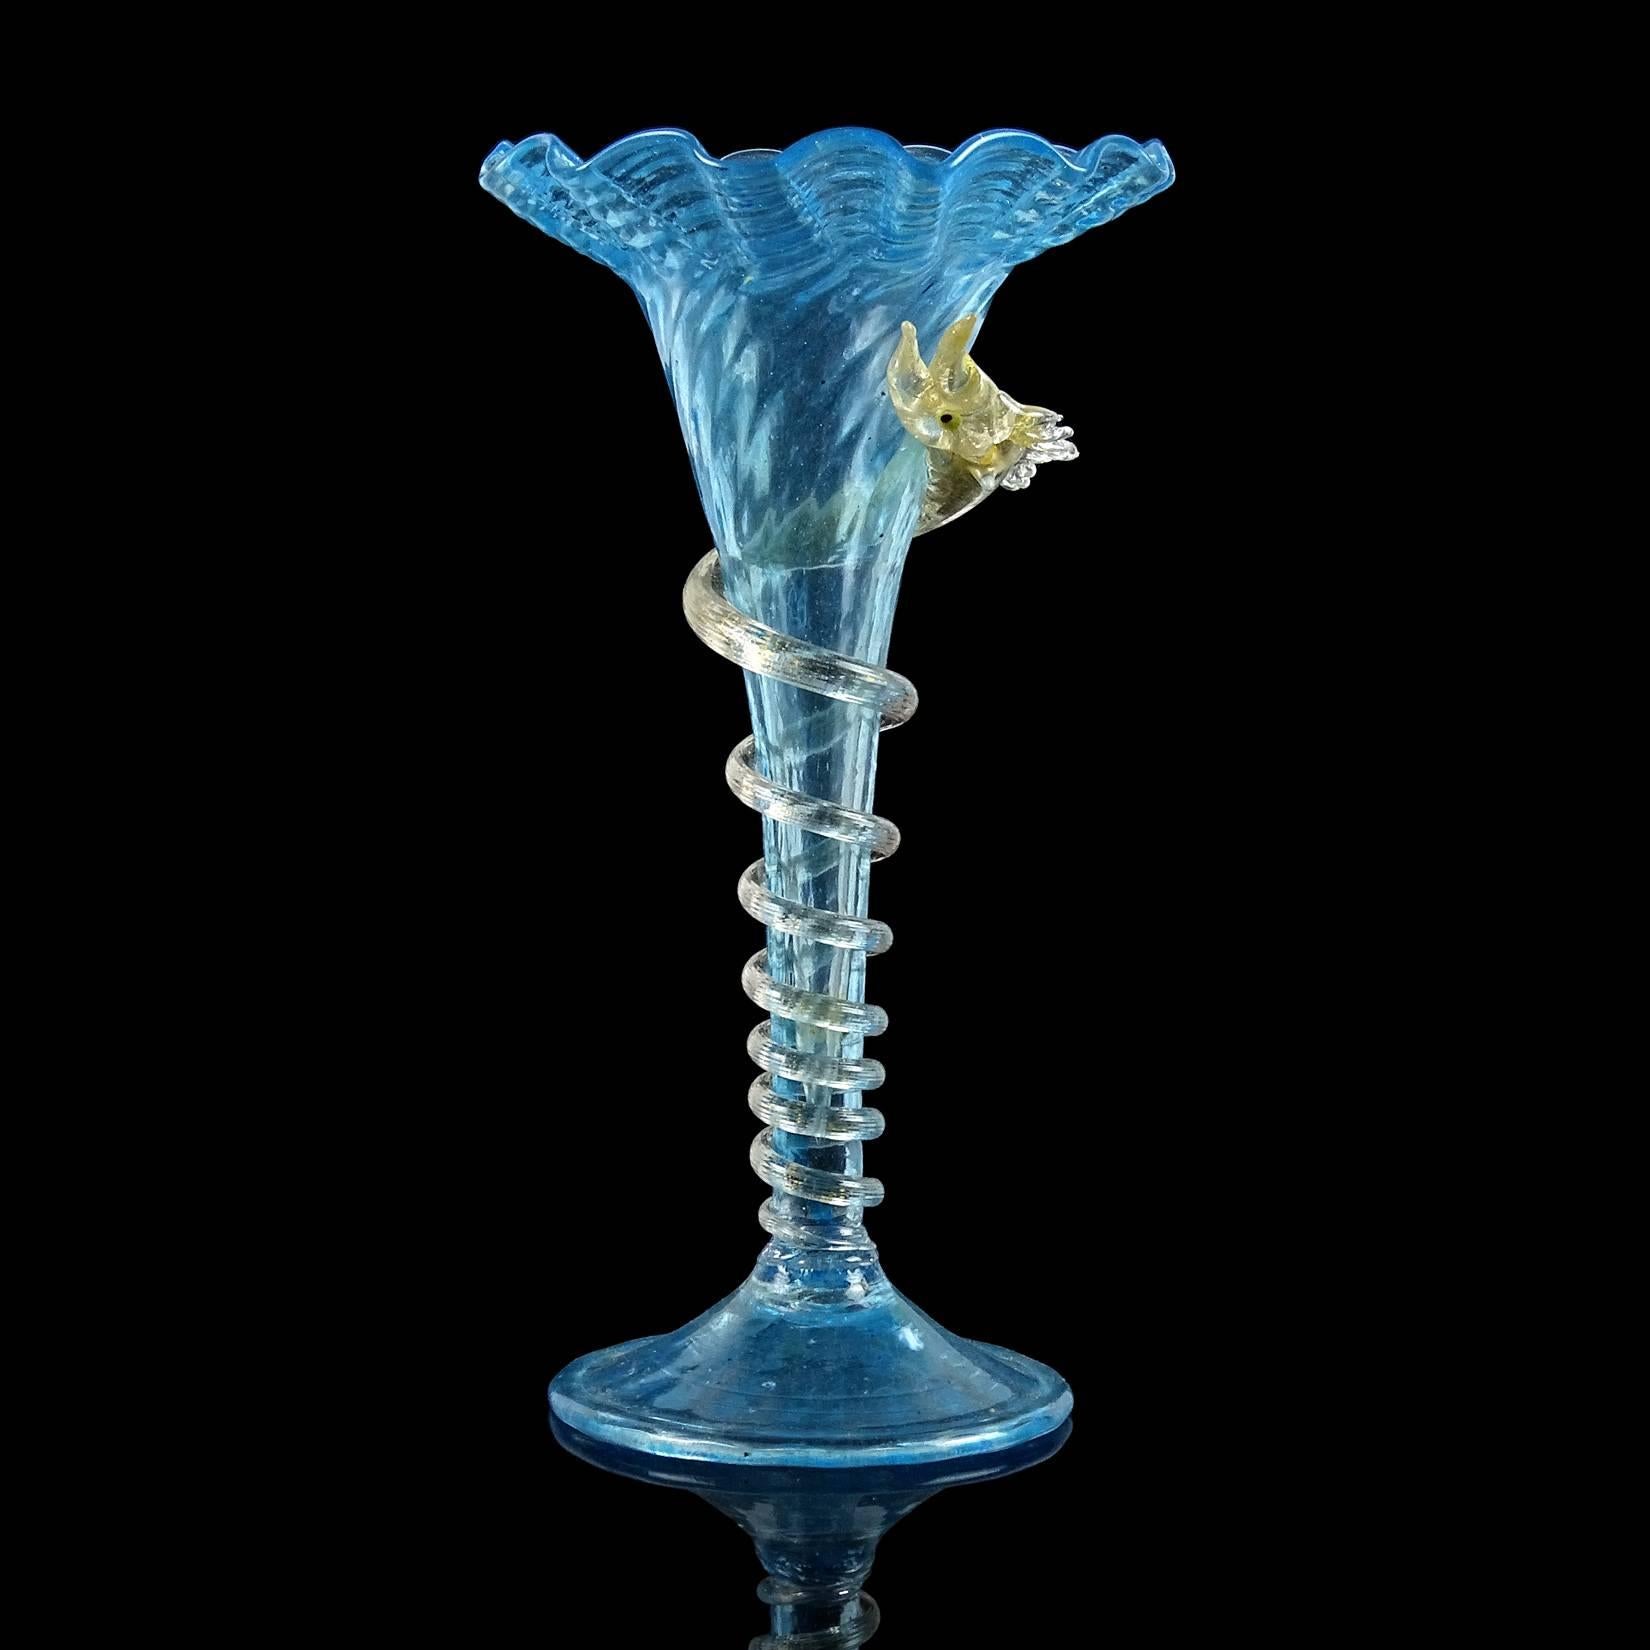 Rare antique Venetian blue with gold flecks Italian art glass sea serpent / dragon vase. Attributed to the Salviati Dott. company, 1875-1900. Elegant and delicate piece with ruffle rim. Measures 7" tall.